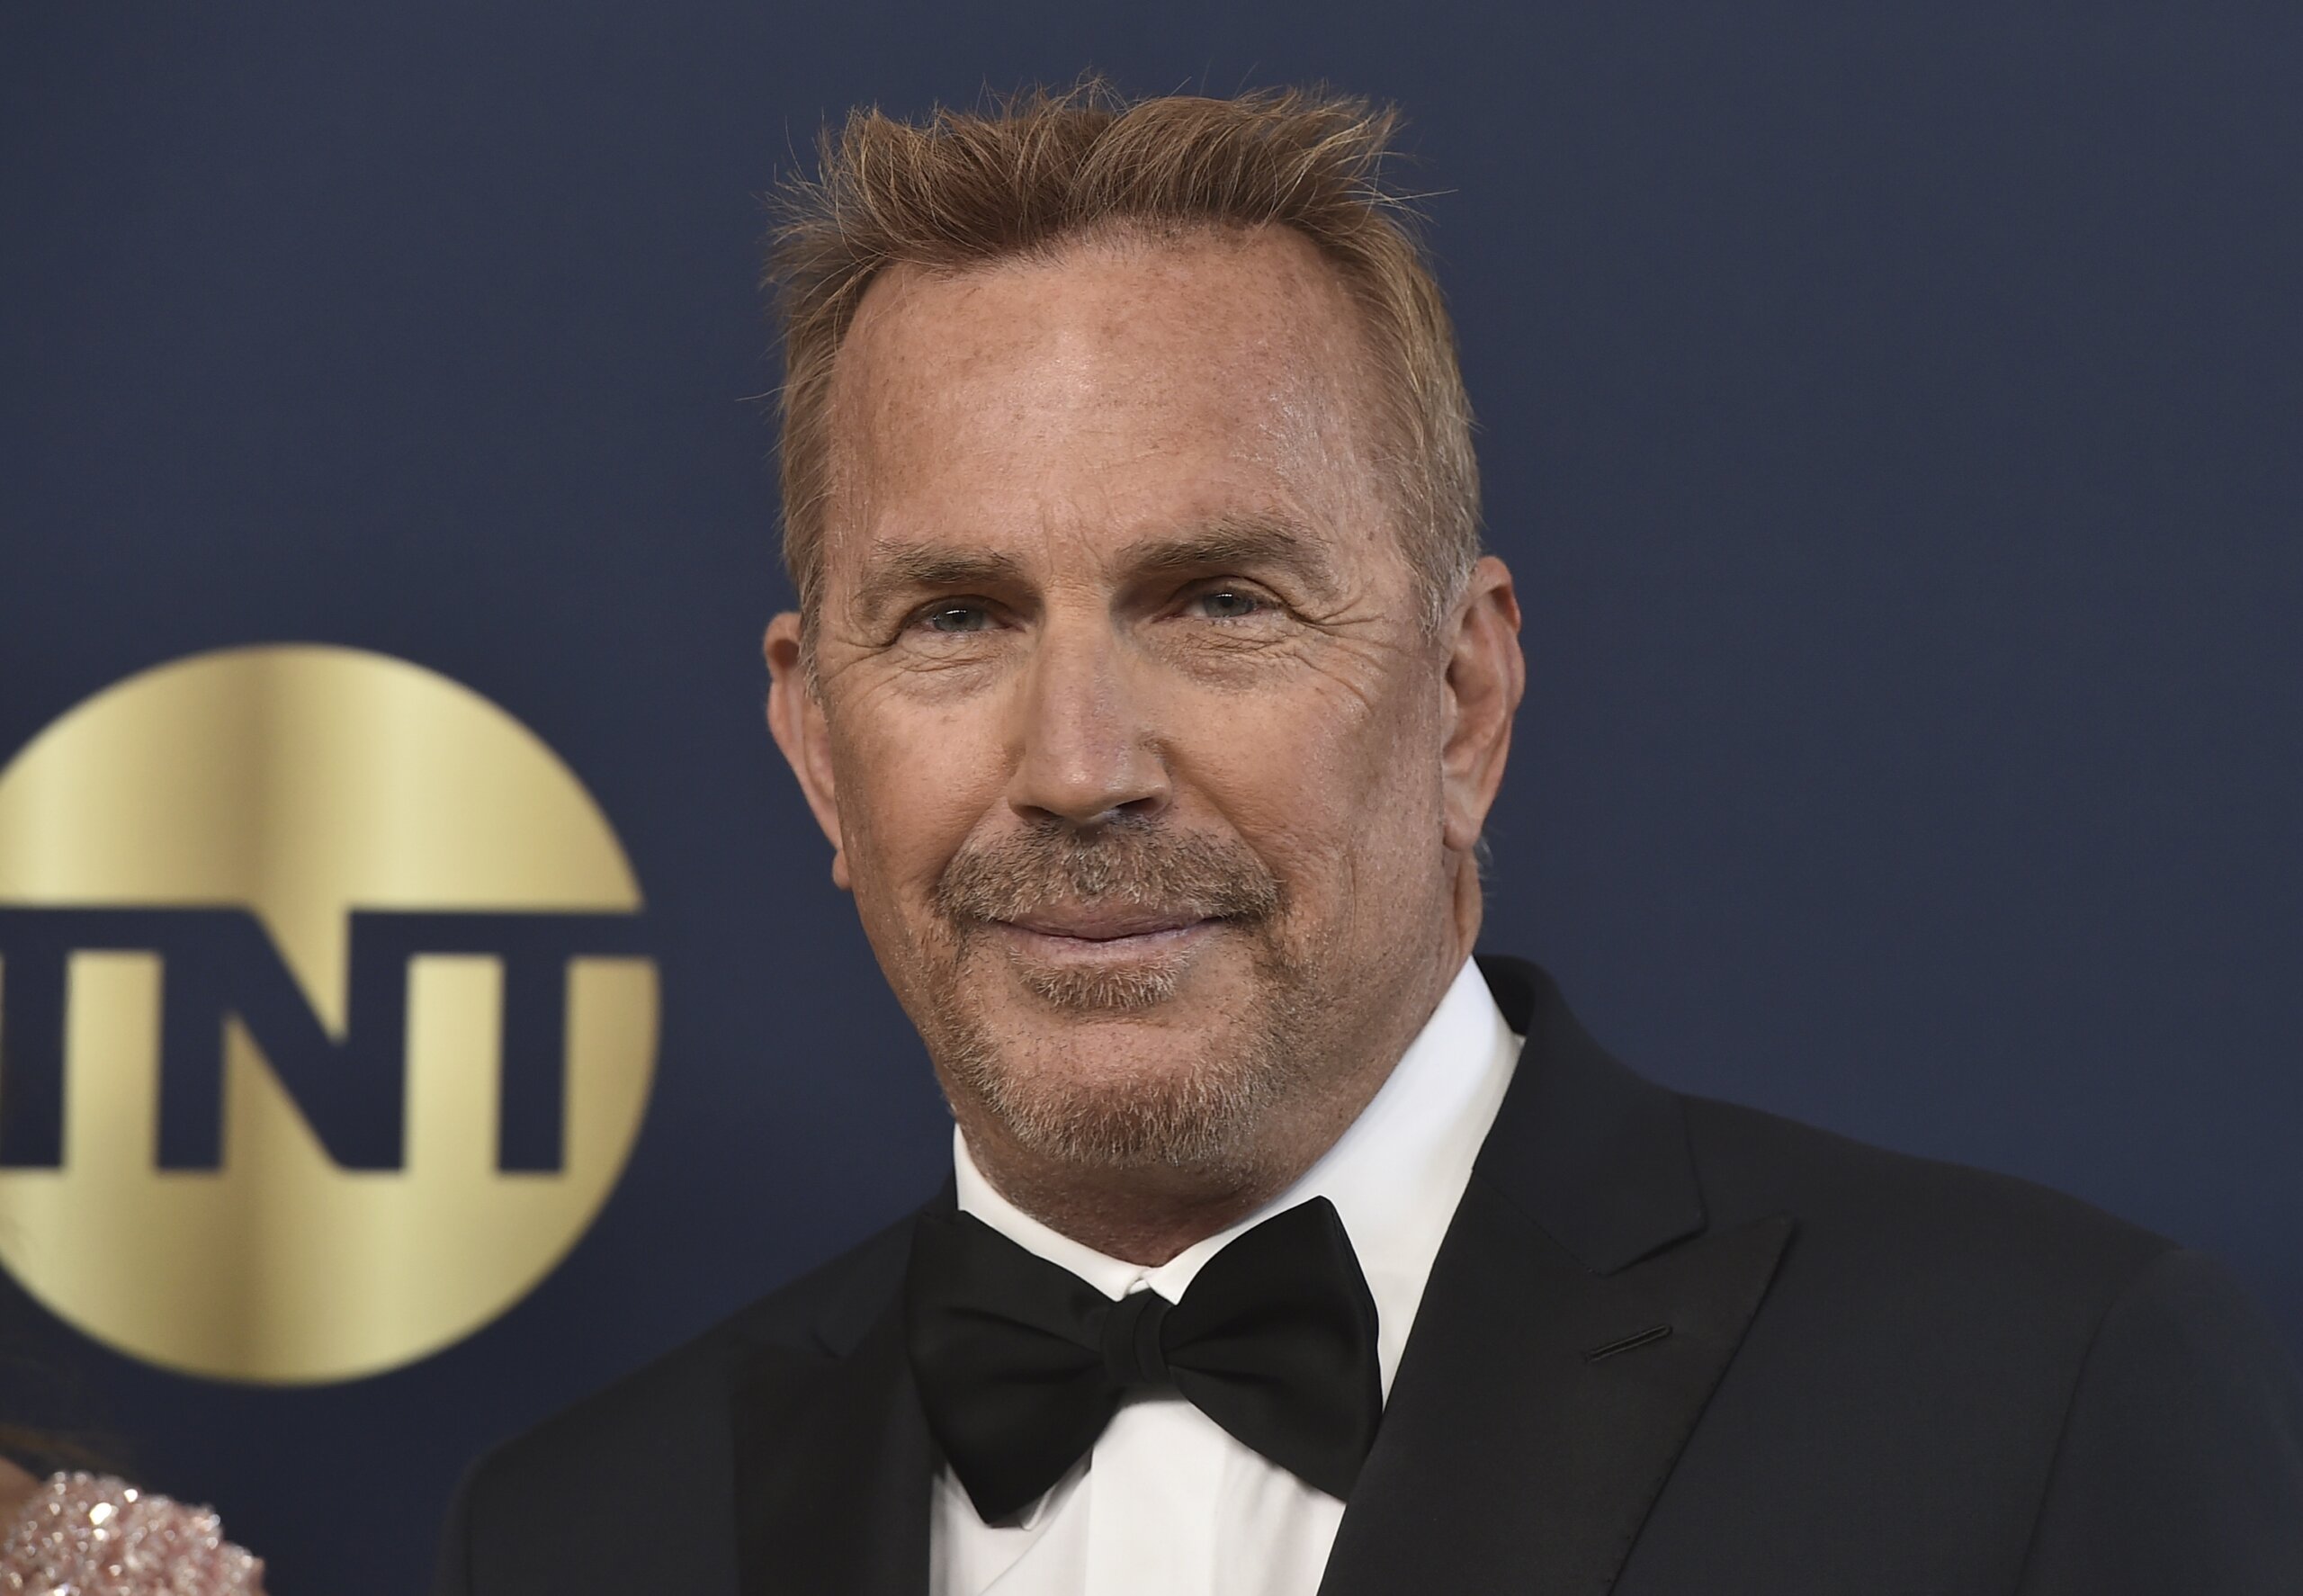 Kevin Costner finally got to hold his Golden Globe after missing the